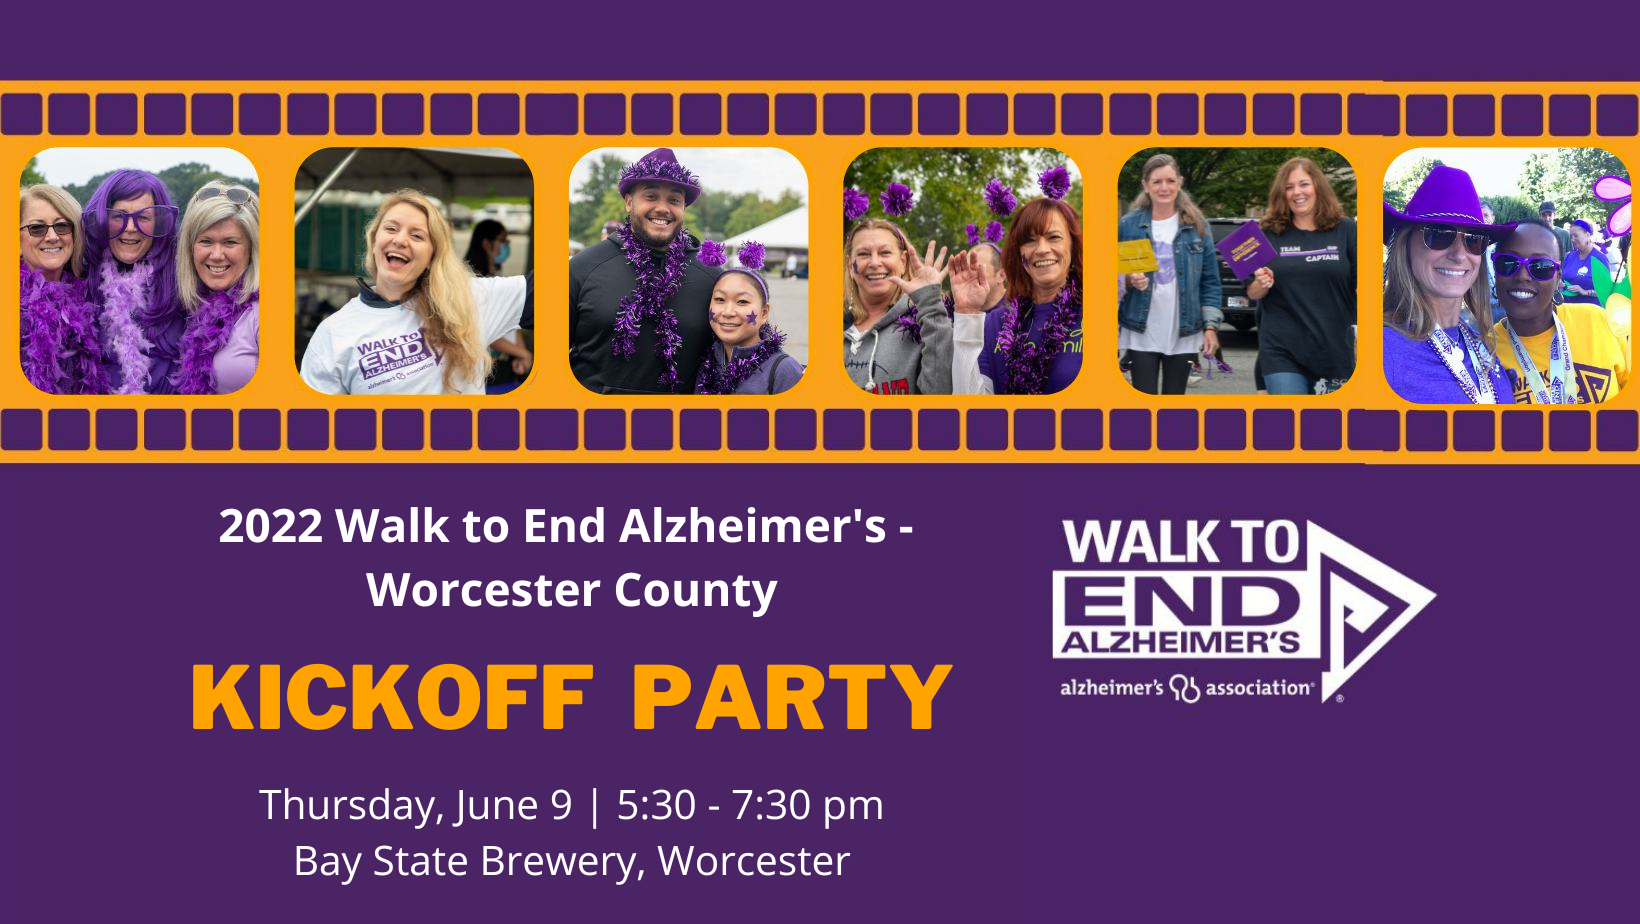 2022 Walk to End Alzheimer's - Worcester County.png